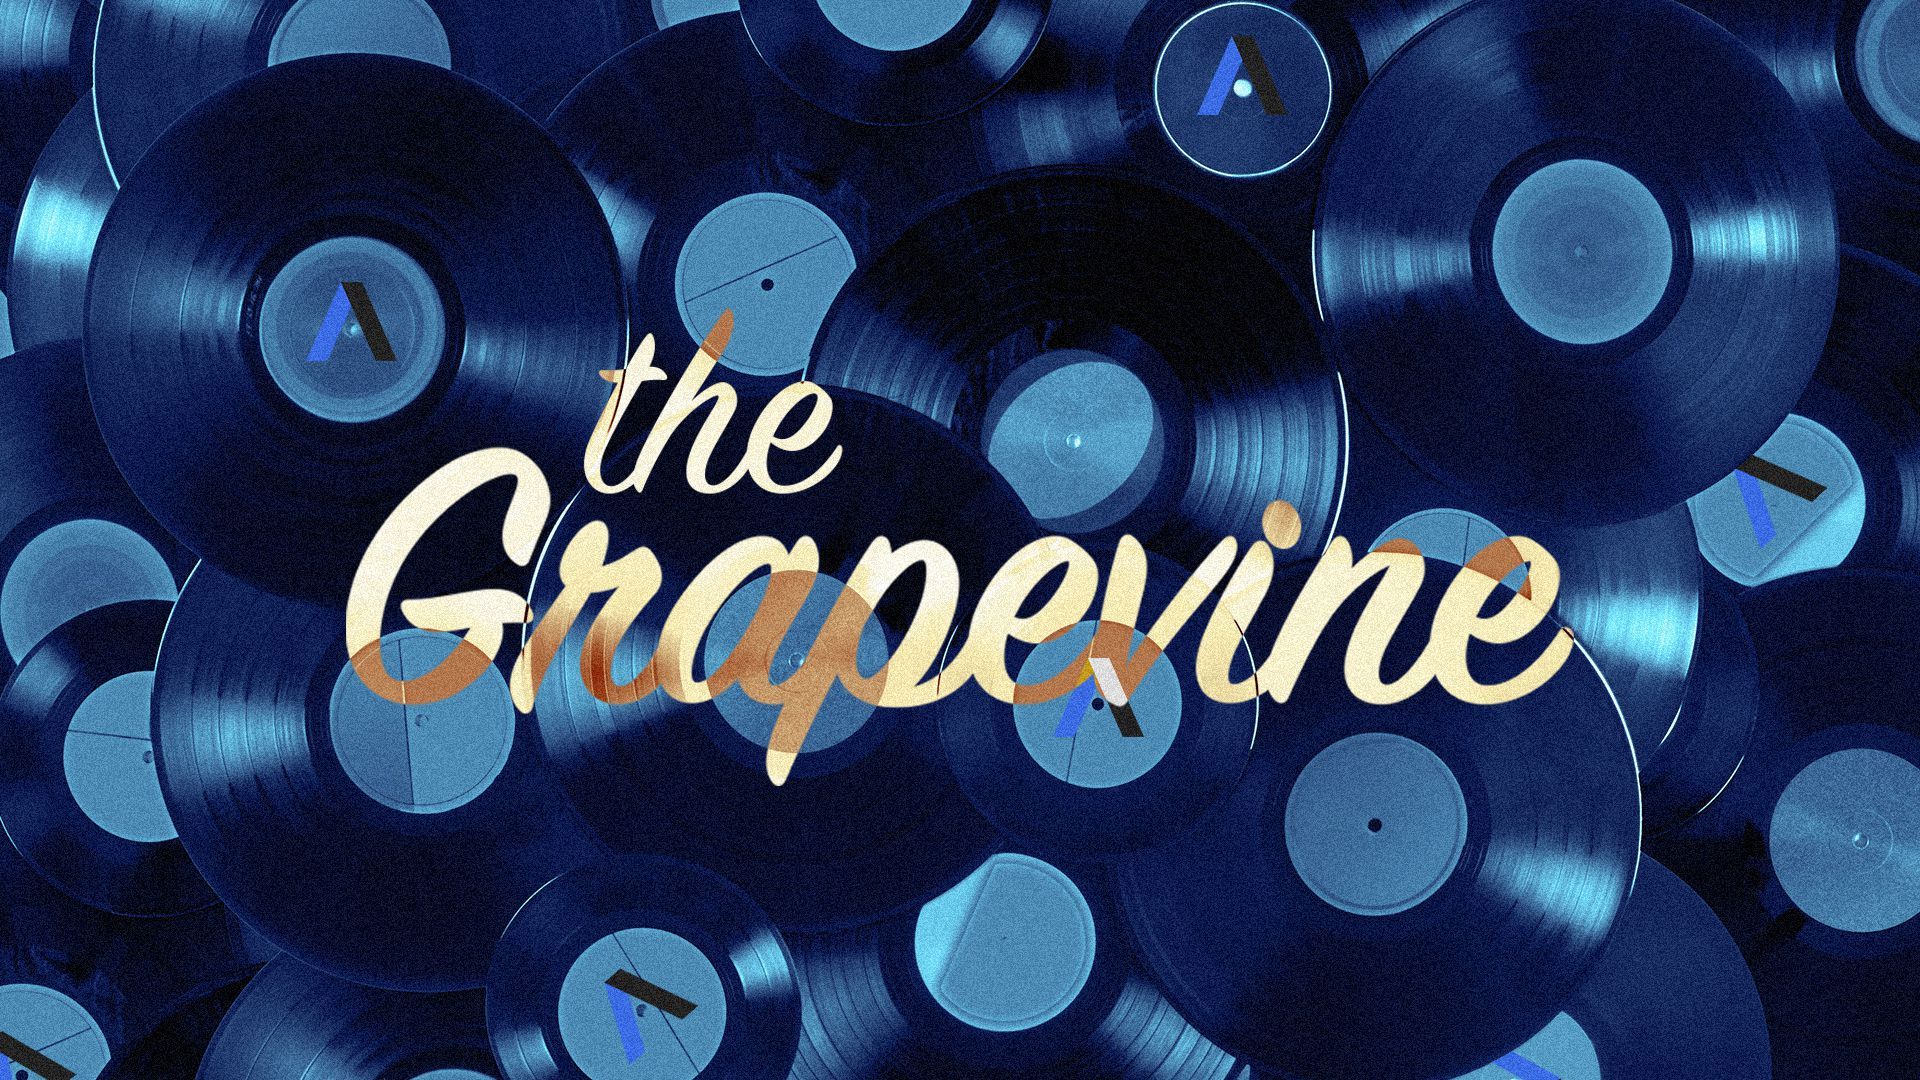 Illustration of text reading "The Grapevine" over a pile of vinyl records.